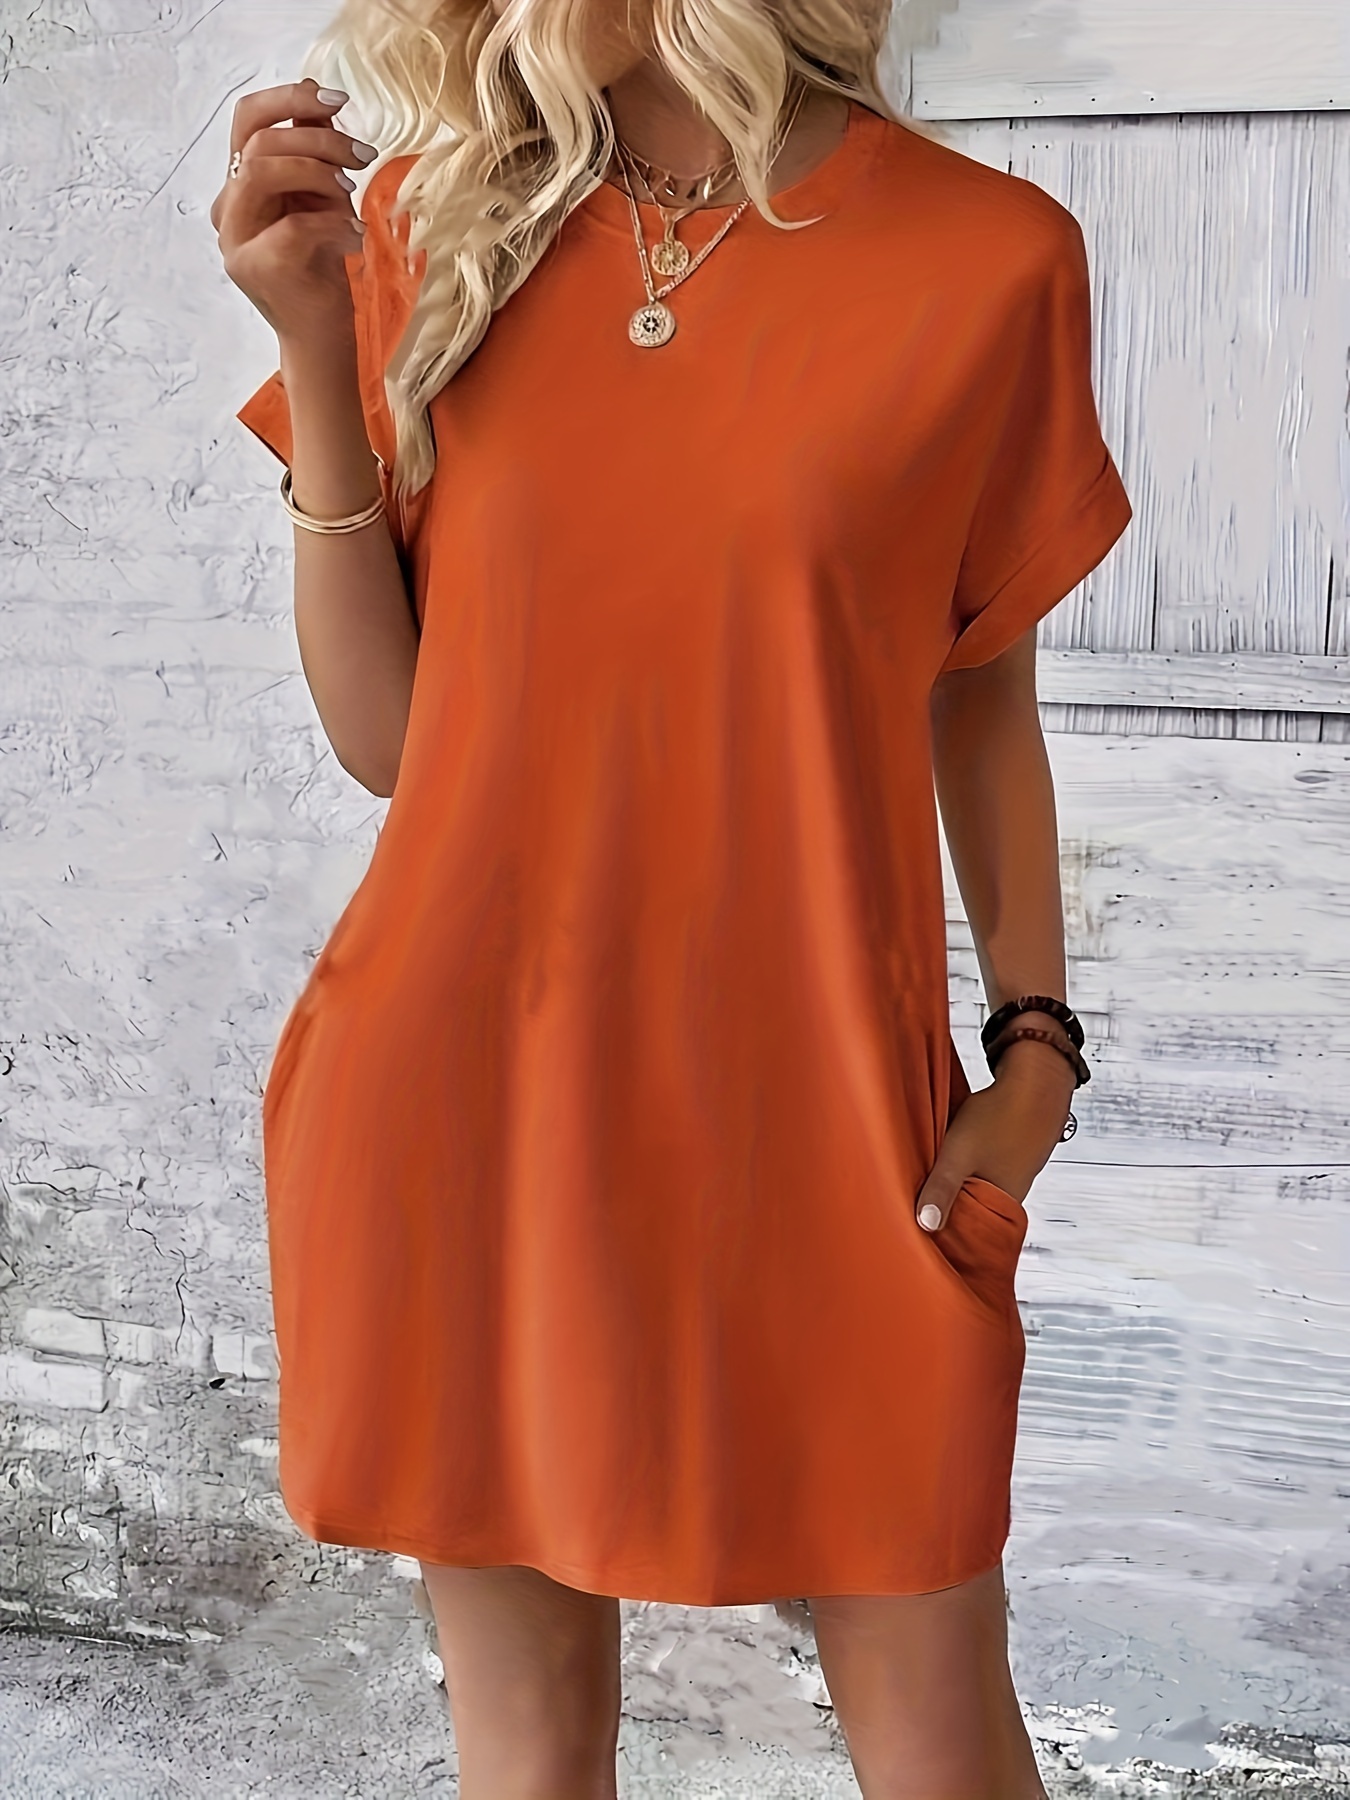 solid color crew neck dress casual short sleeve loose fit dress for spring summer womens clothing details 3